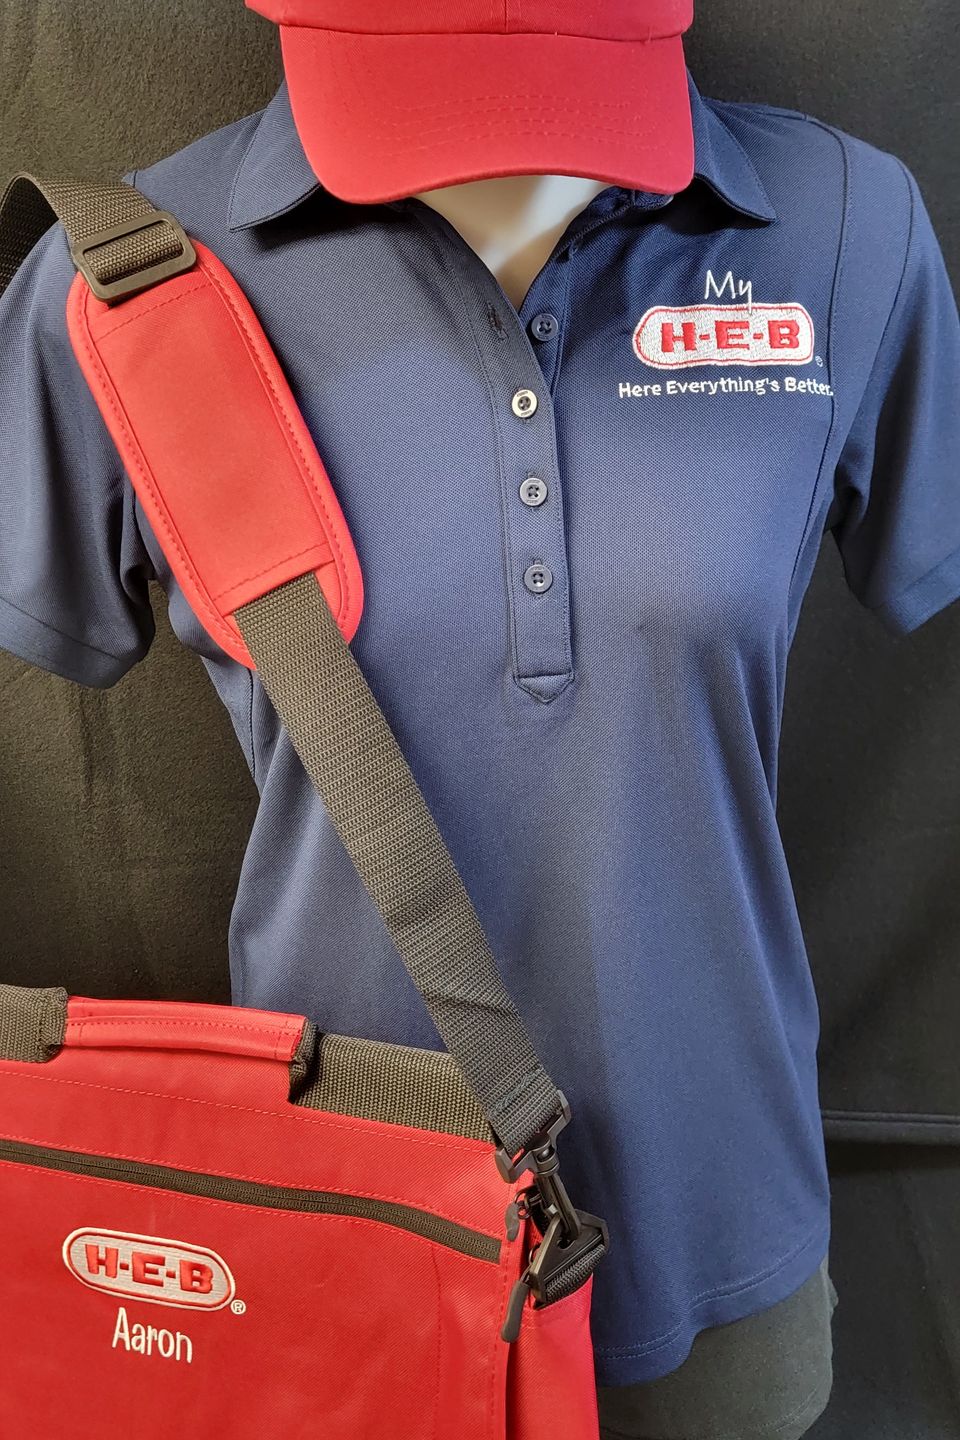 HEB Logo applied to blue shirt, red cap, and laptop bag bt SaRi's Creations